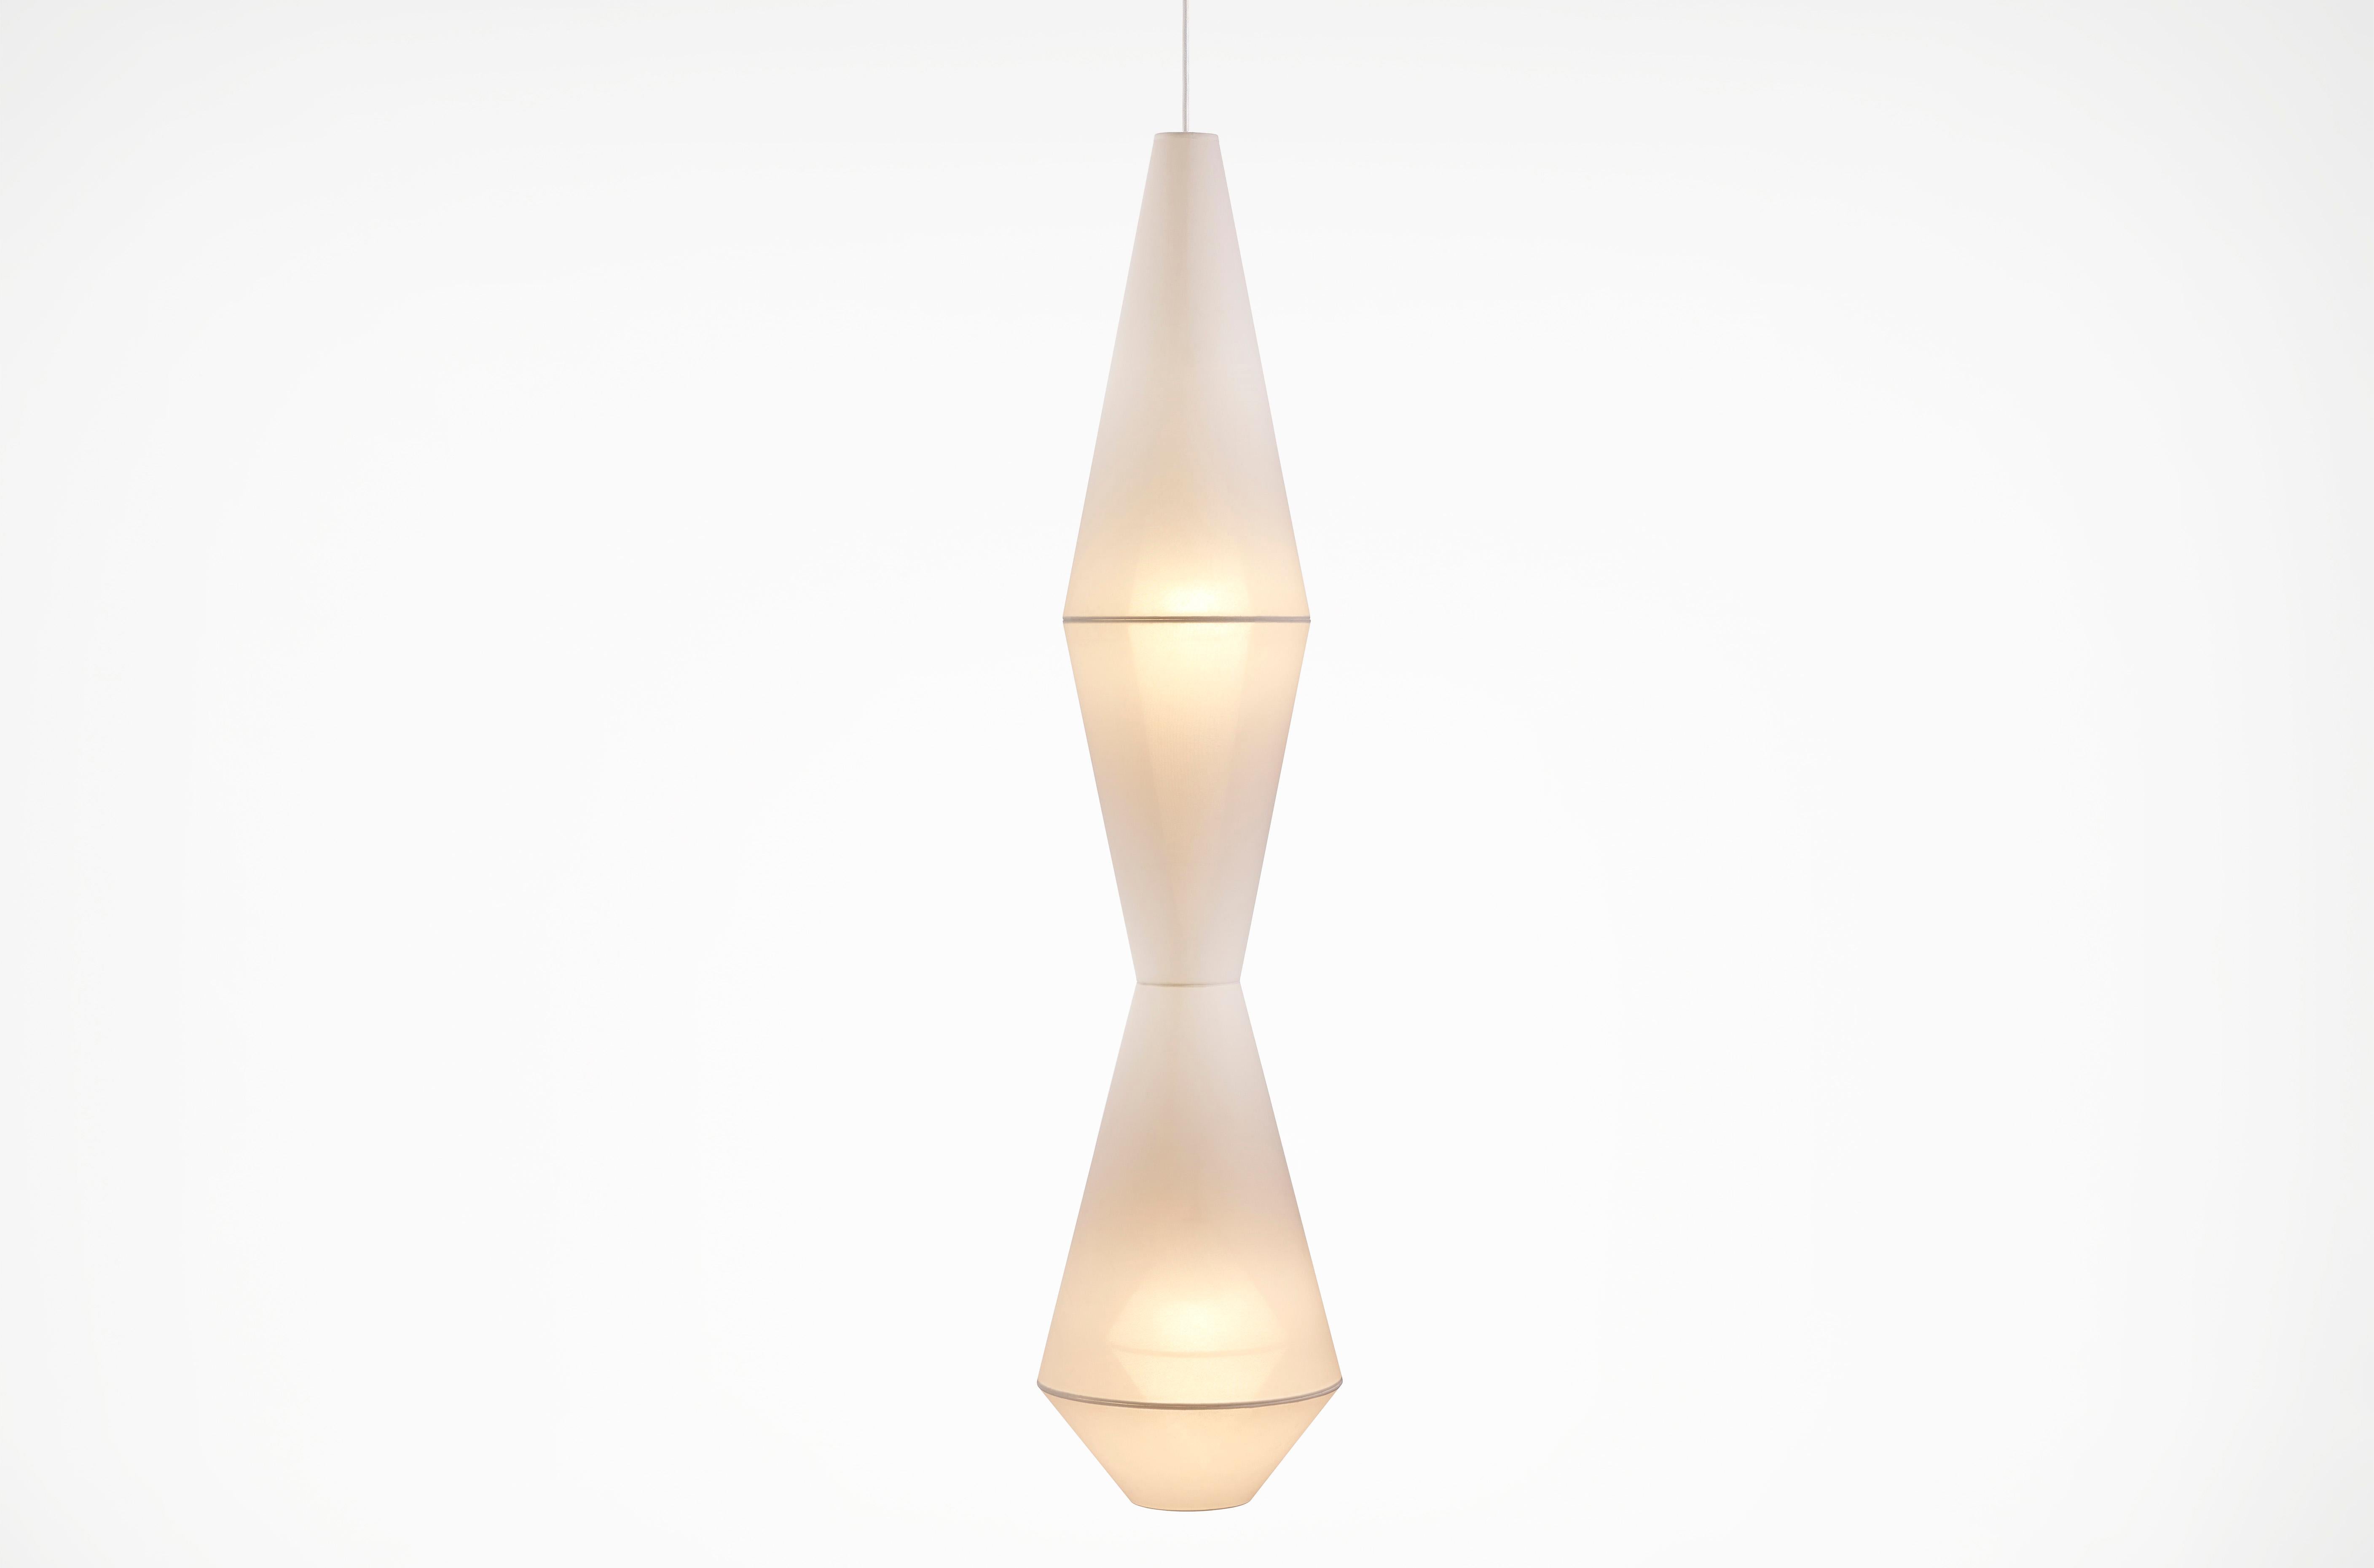 Mayu 04 Pendant Light by Coco Flip
Dimensions: D 38 x W 38 x H 170 cm
Materials: White mesh fabric on transparent backing. 
Weight: 2.2kg

Standard fixtures included
Pendants:
1 x 80mm Ø ceiling canopy (white)
Black also available on request
2